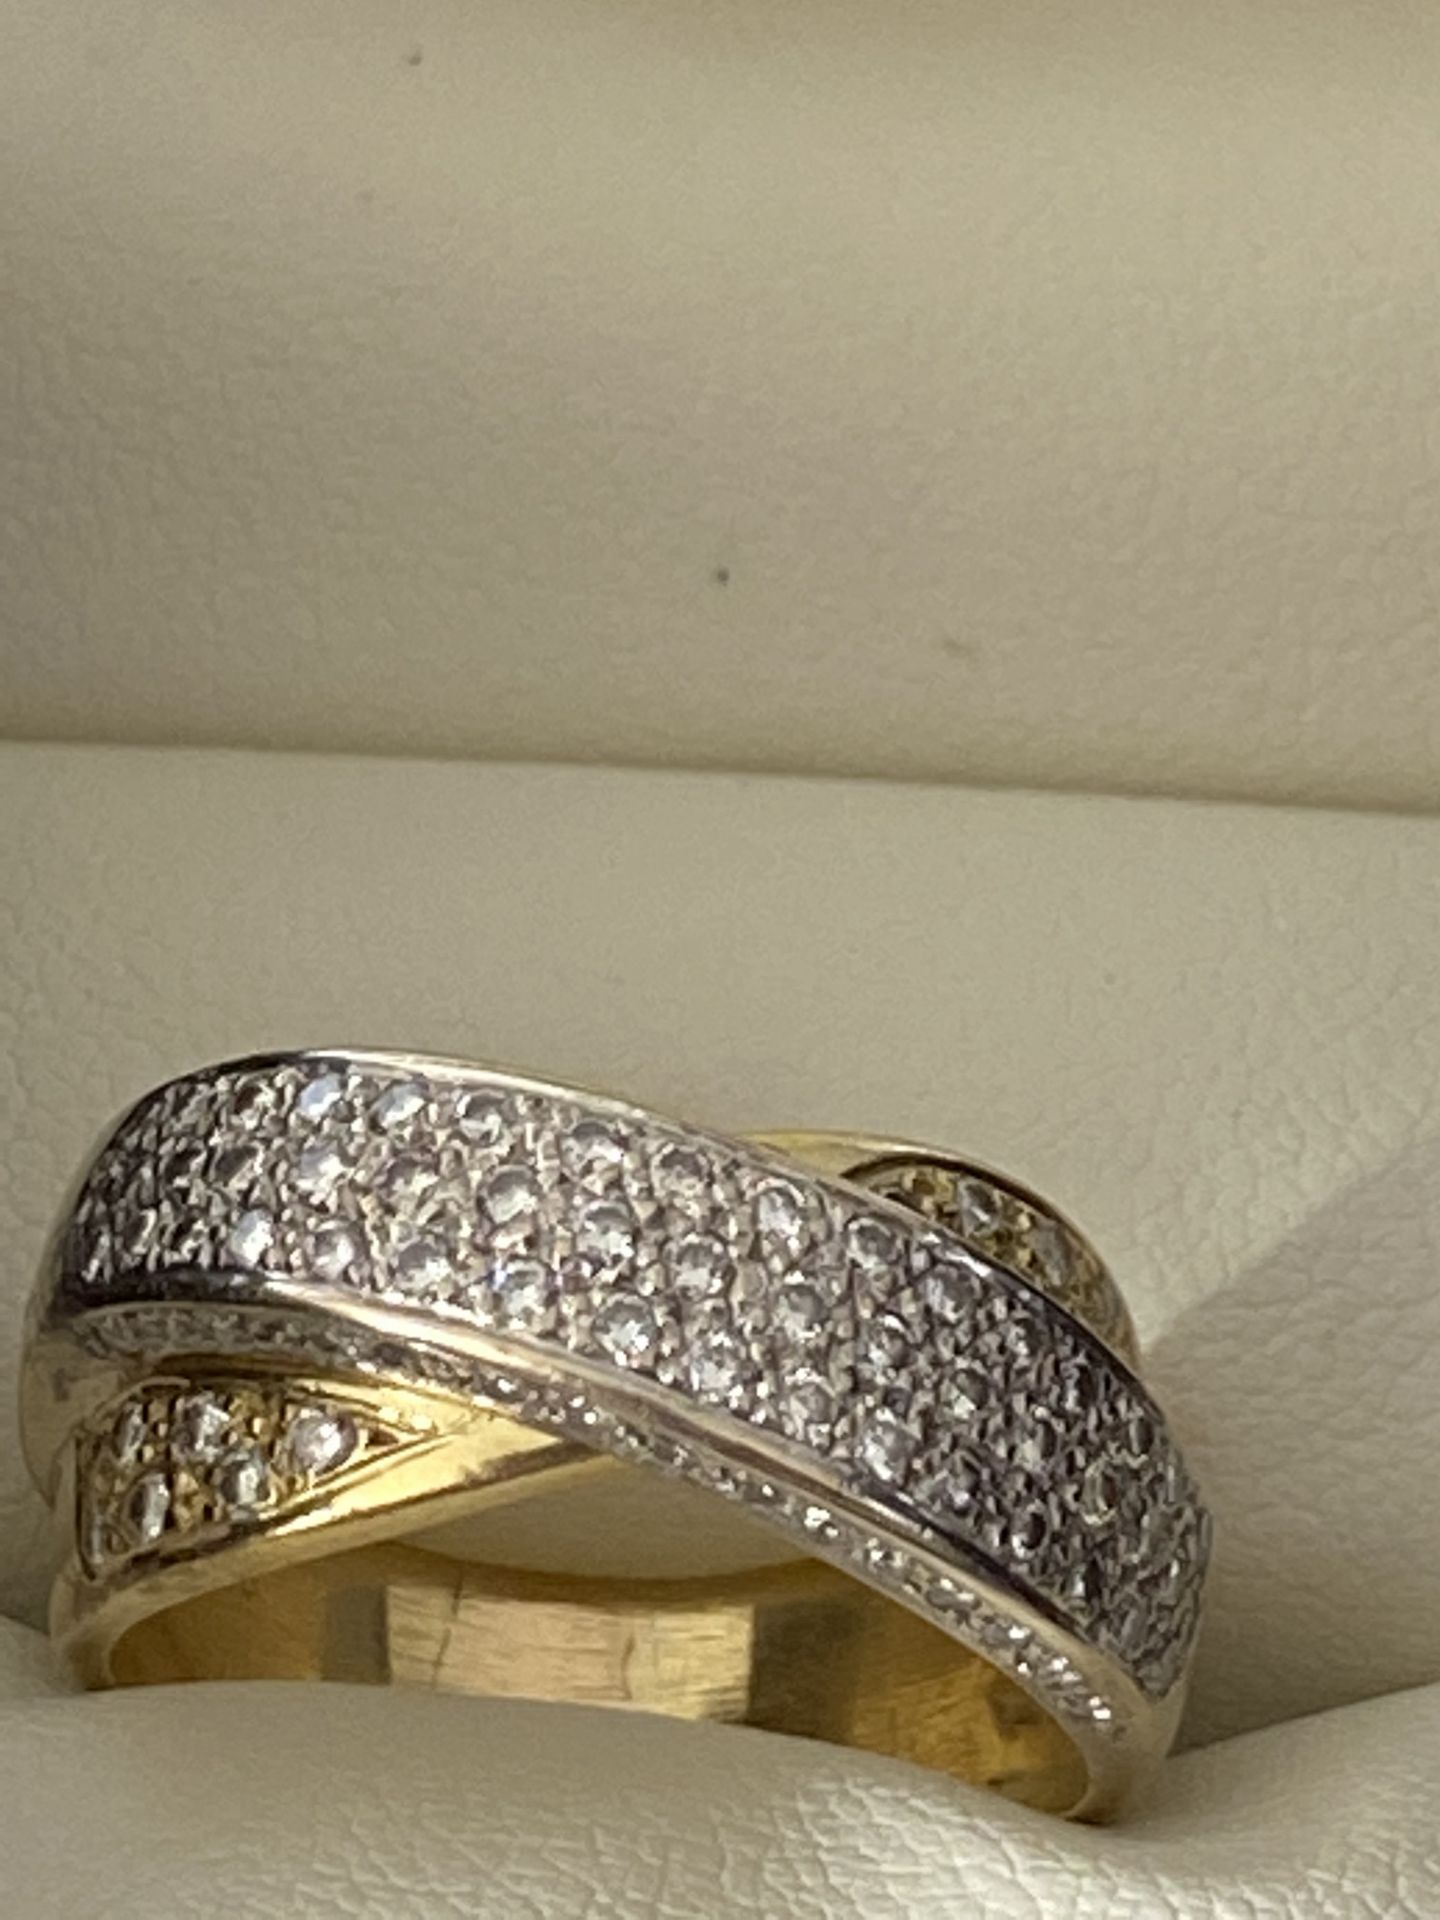 18ct GOLD 1.00ct DIAMOND CROSSOVER RING - Image 4 of 5